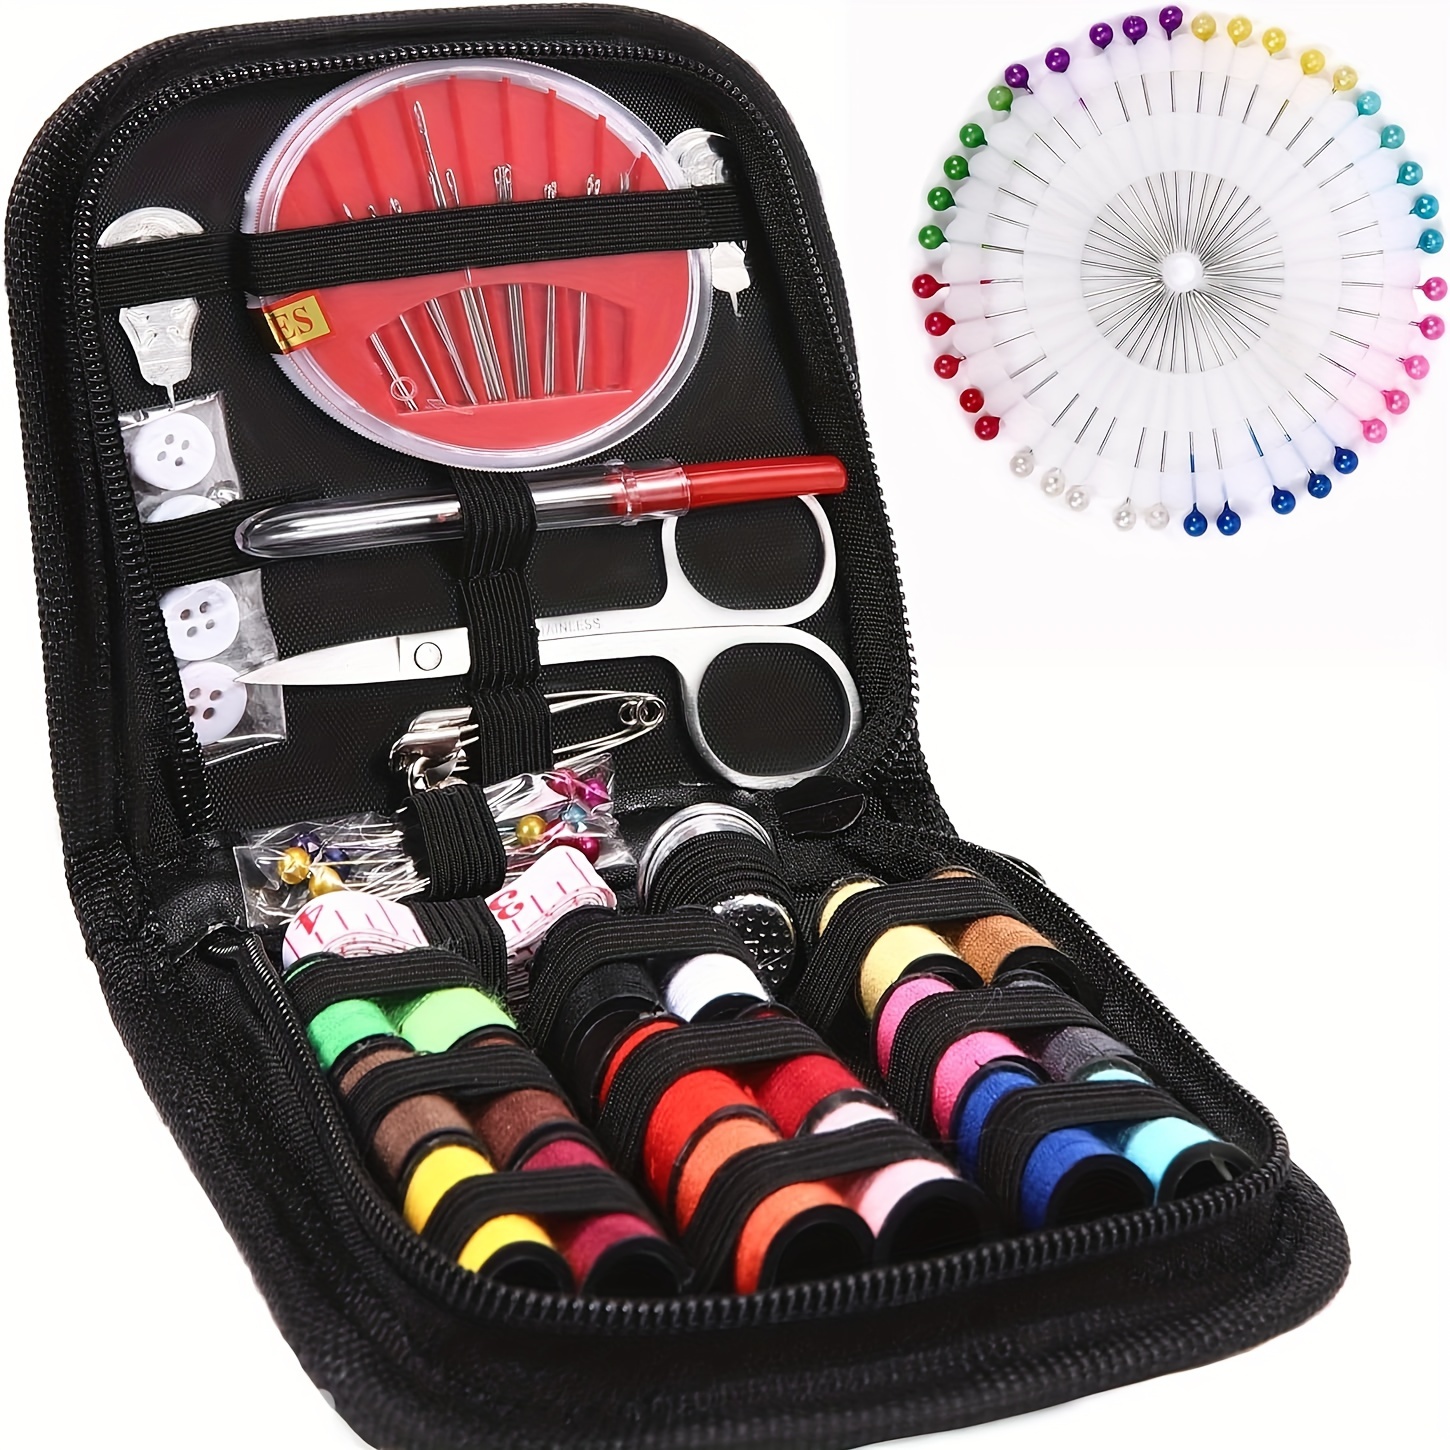 

67-piece Deluxe Sewing Kit With Zippered Case – Versatile Mini Sewing Kit For Beginners, Travelers, Adults – Portable Repair Set For On-the-go Fixes, Home And Emergency Use